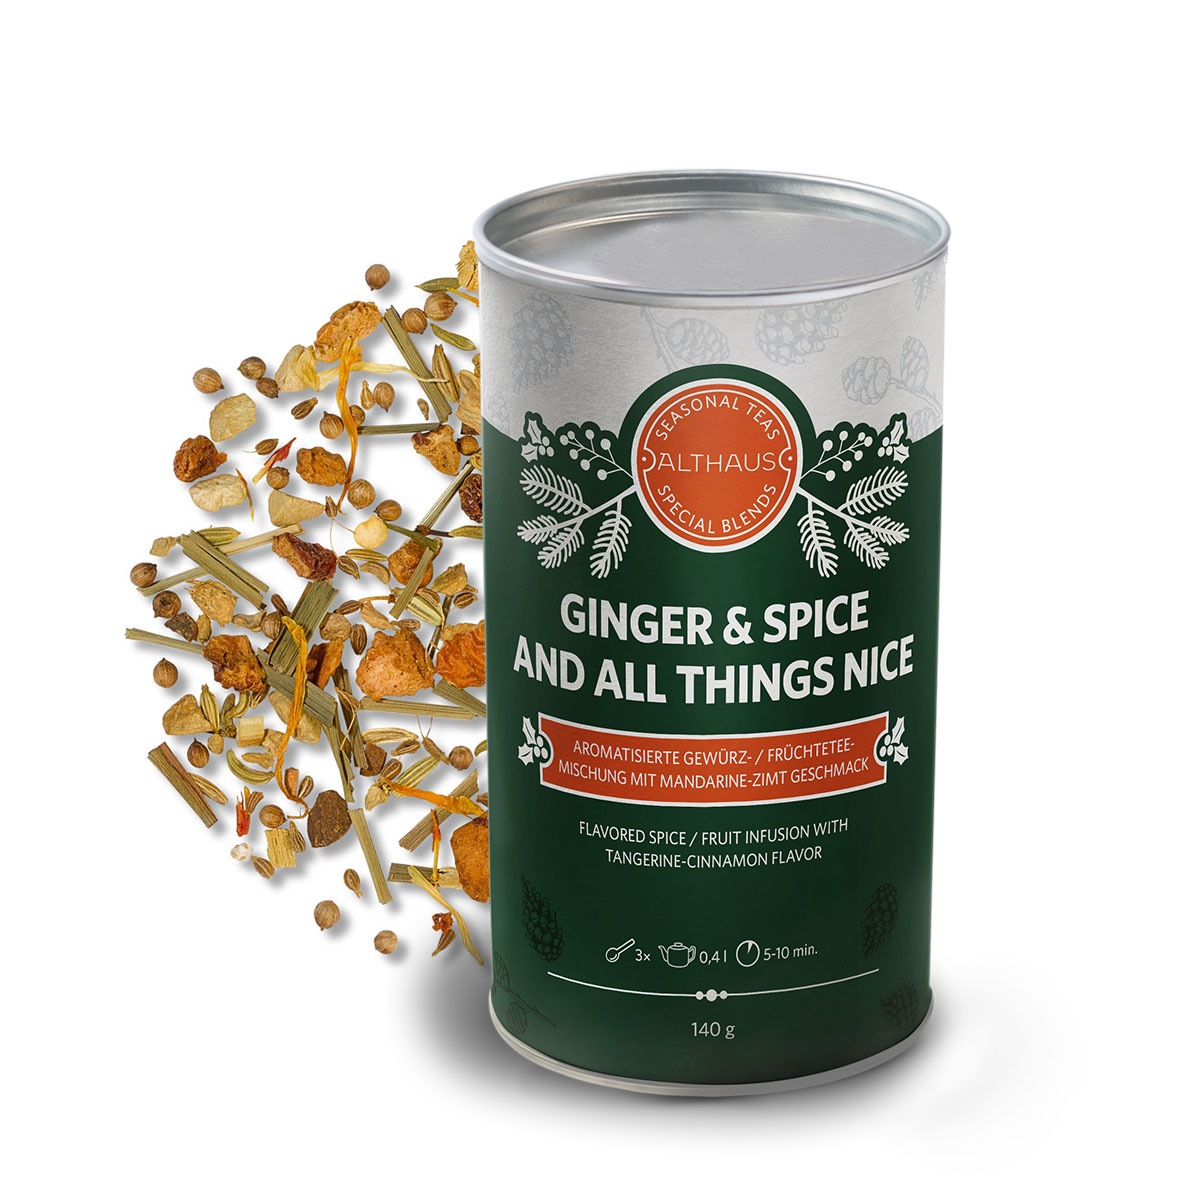 Ginger & Spice And All Things Nice